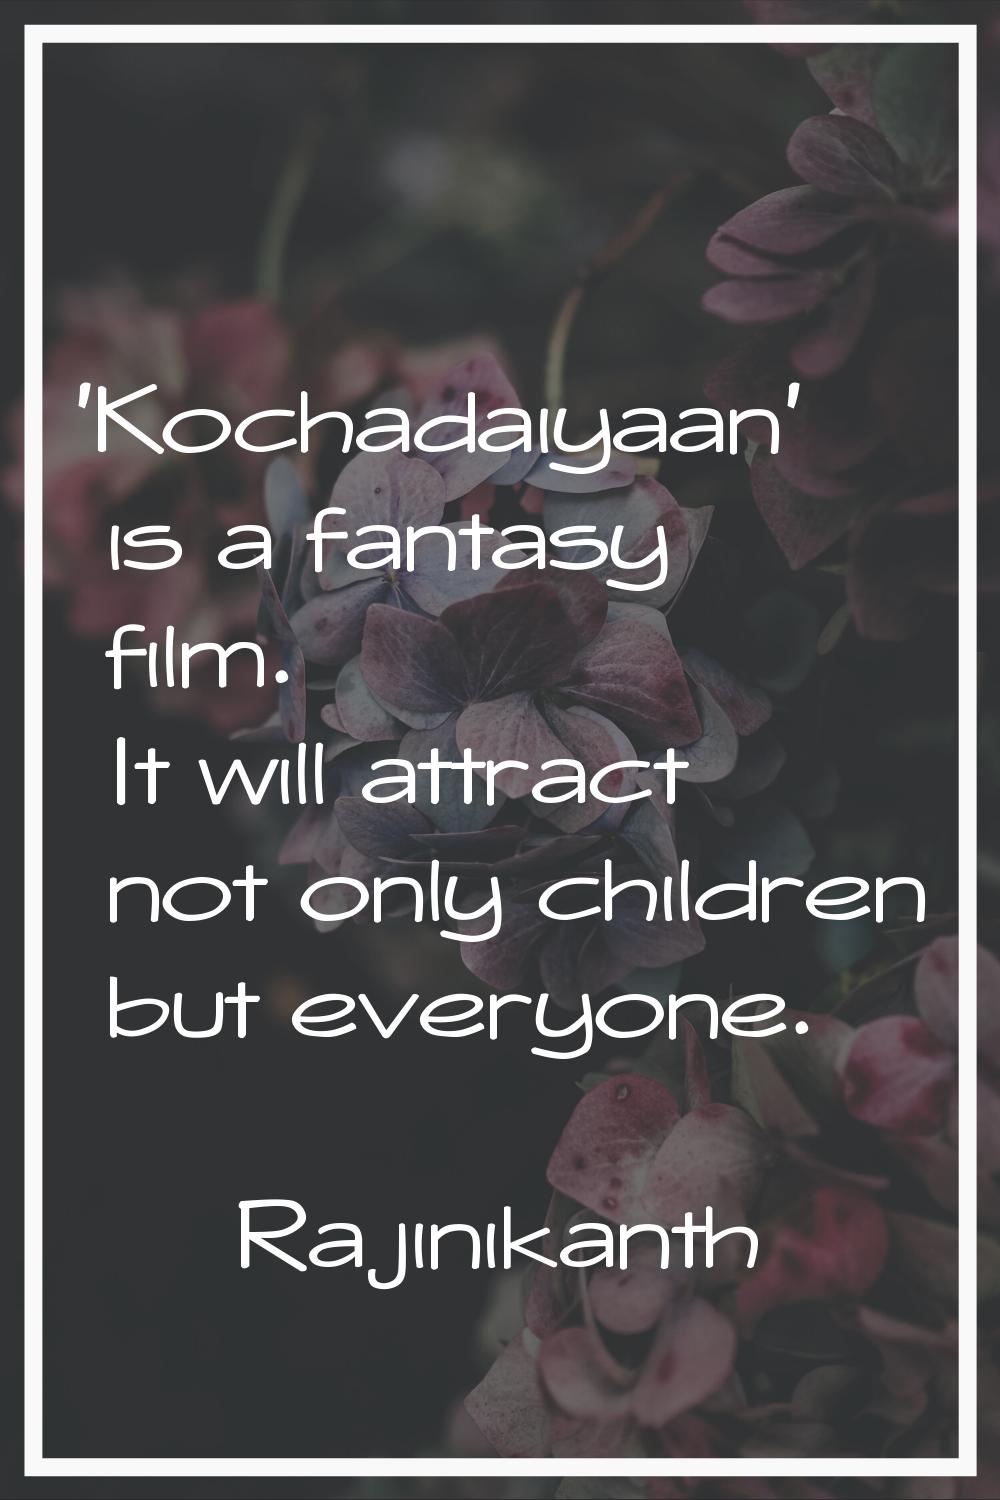 'Kochadaiyaan' is a fantasy film. It will attract not only children but everyone.